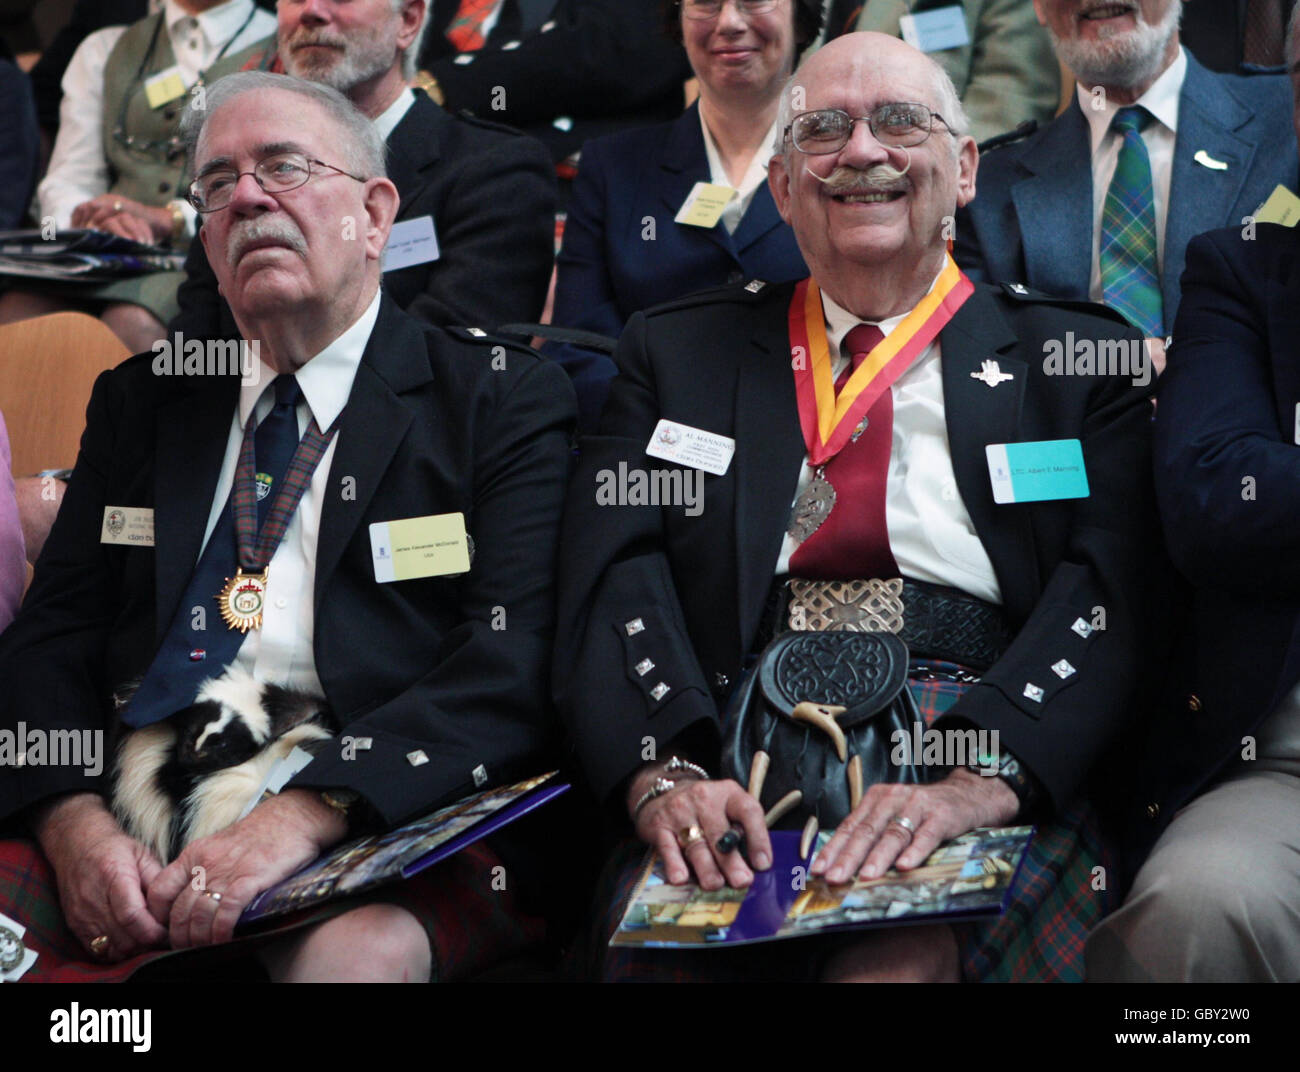 Clan members in Edinburgh at the Clan Convention. One hundred of Scotland's Clan Chiefs will gather for a Clan Convention as part of the Gathering weekend in the city. Stock Photo